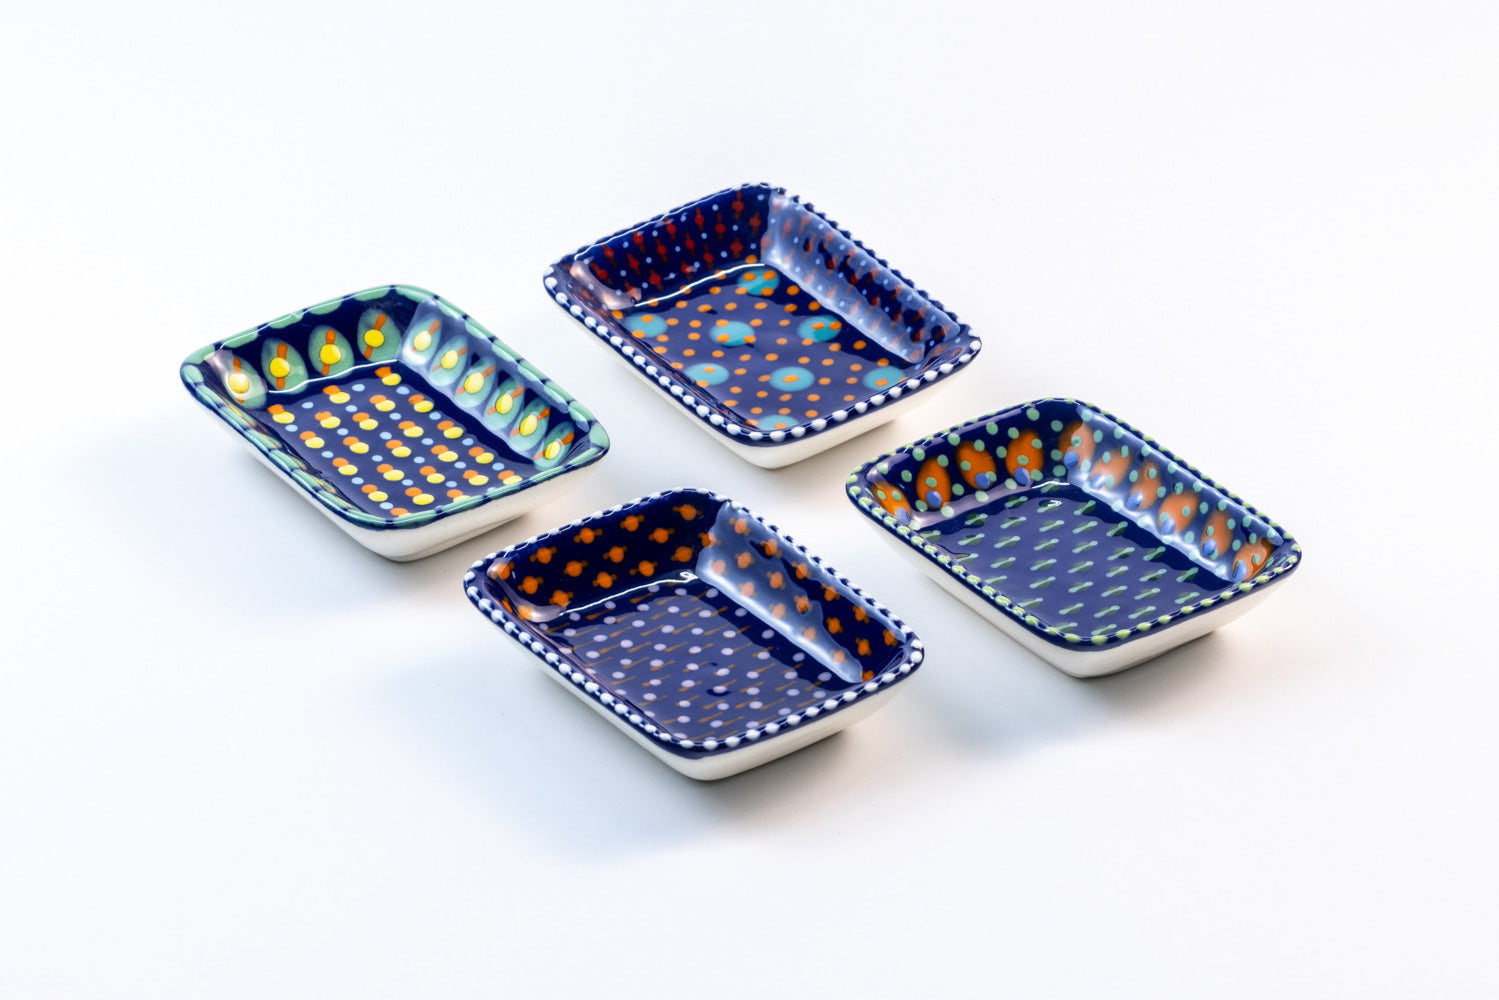 4 ceramic rectangle shape Tiny Bowls with Indigo blue base color. Dots & Stripes painted on top in yellow, red, orange and jasper green.